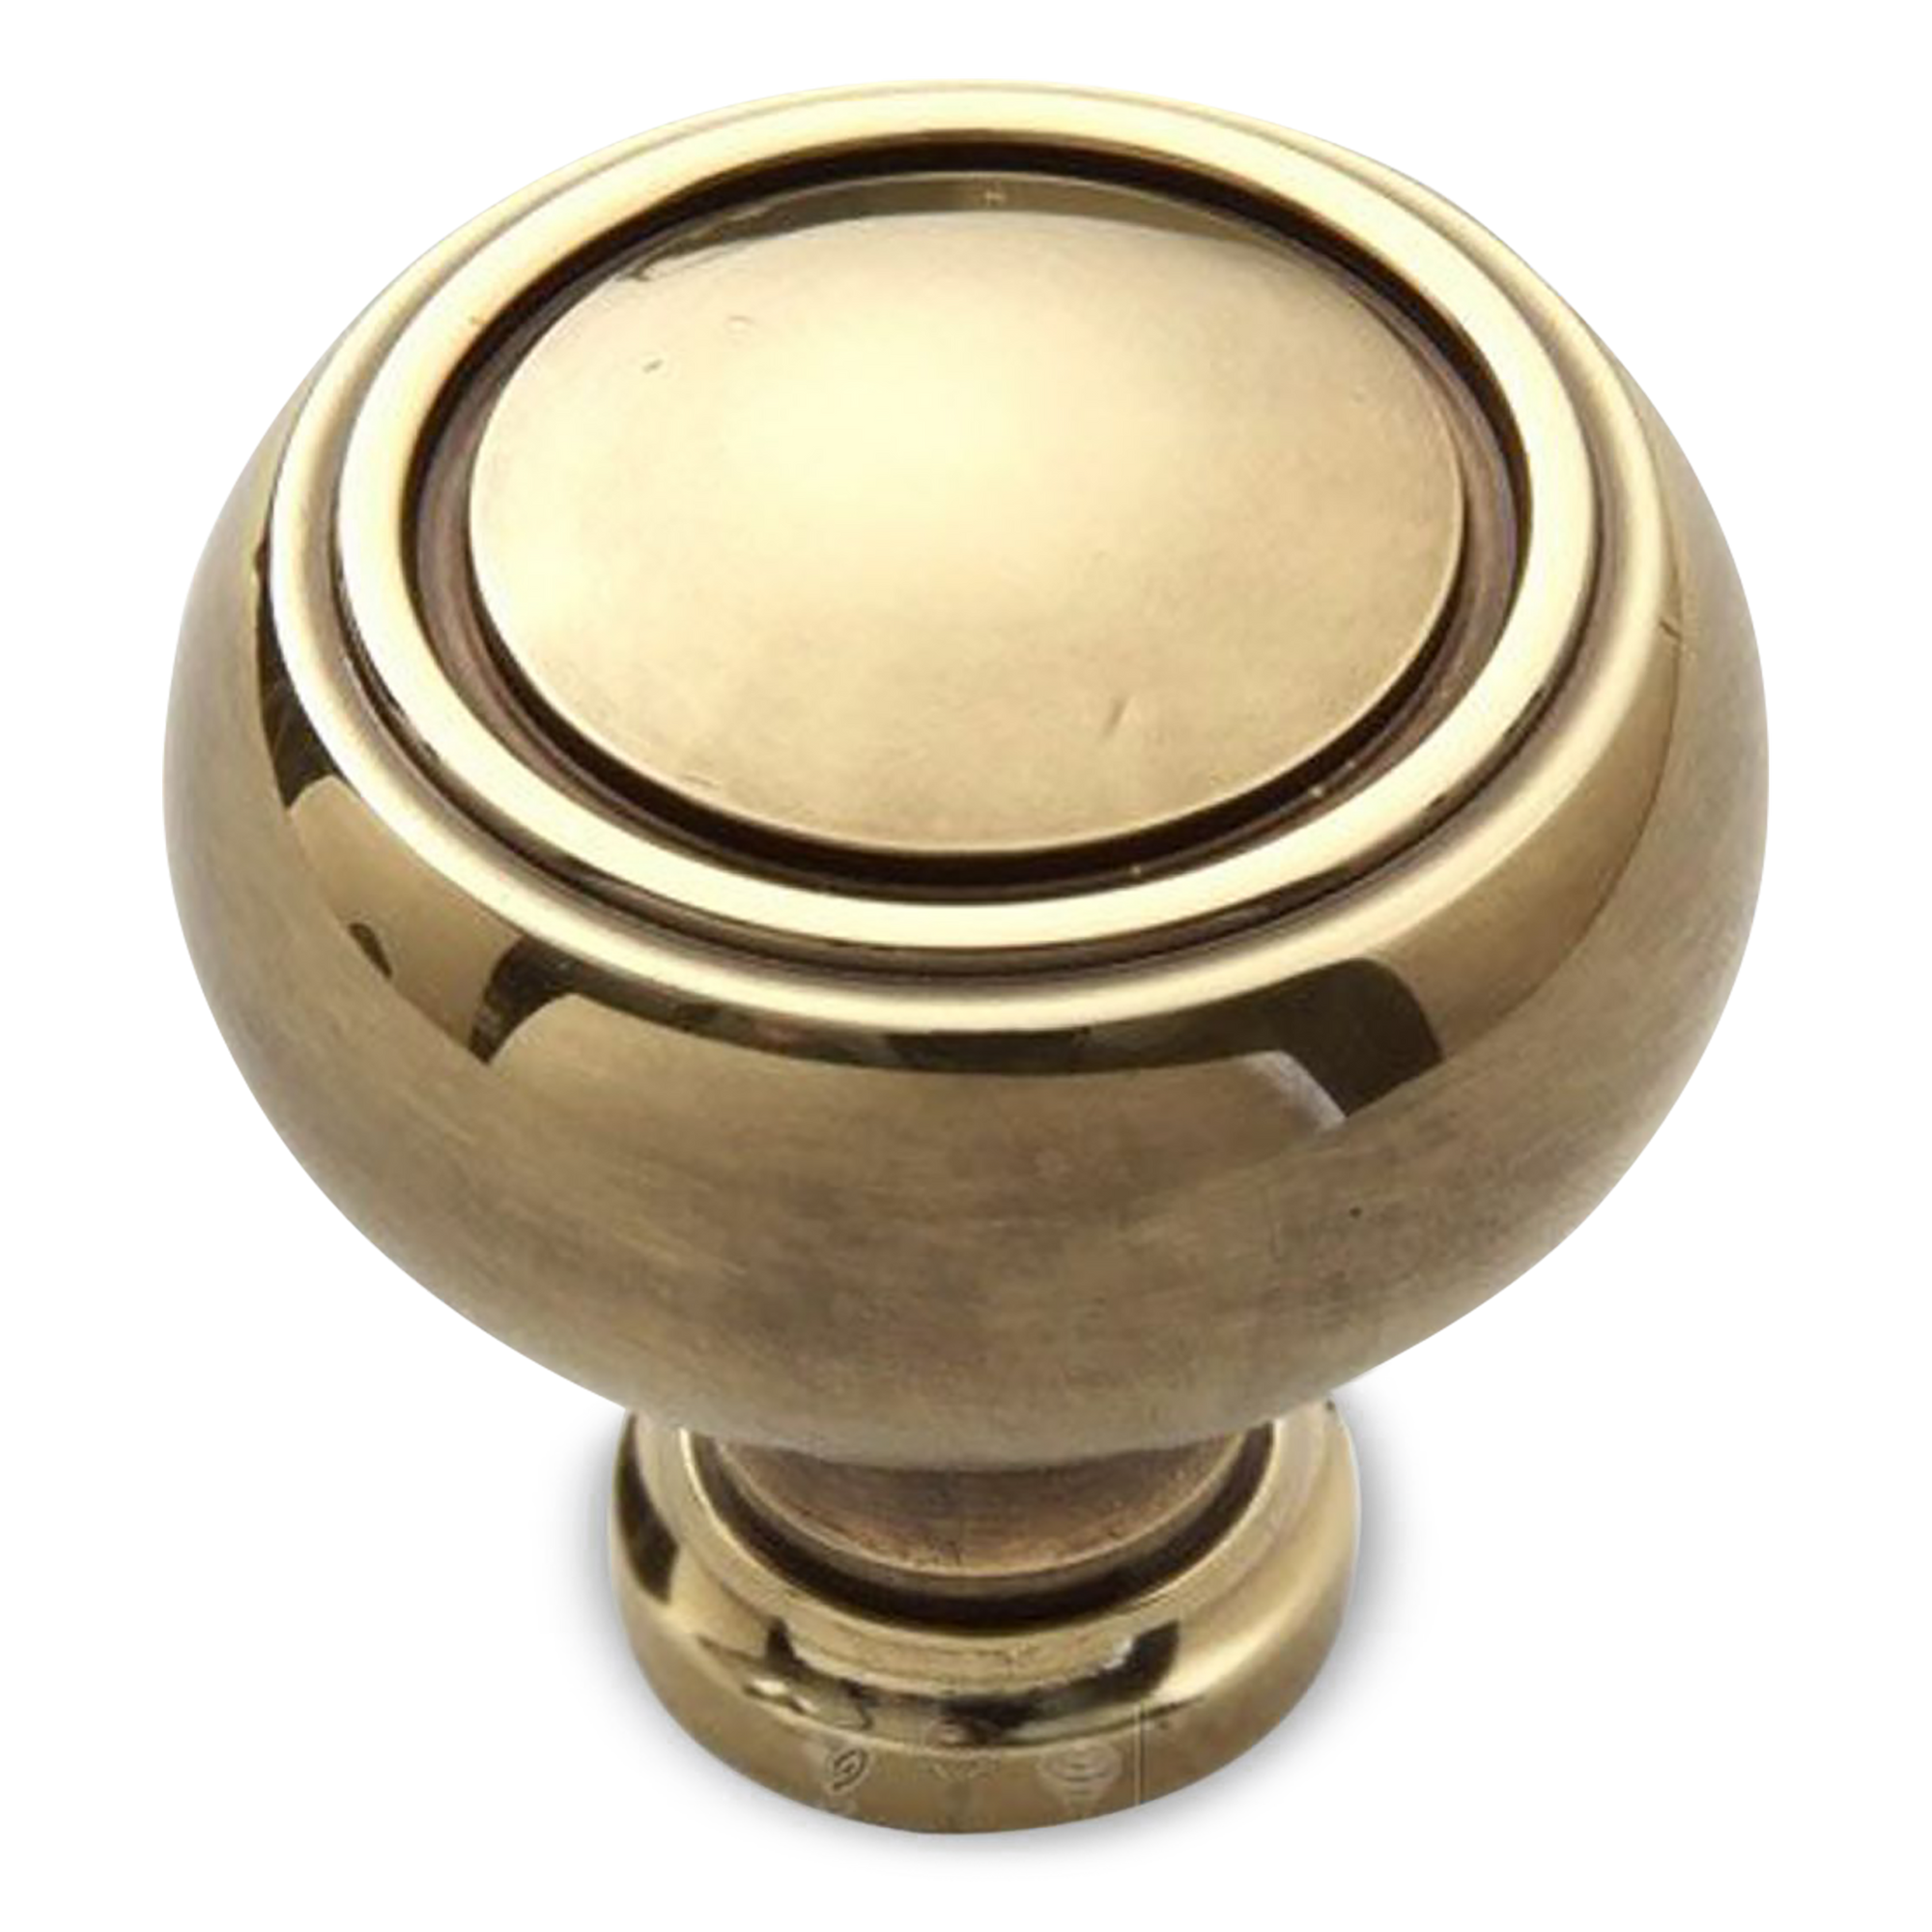 A spherical knob with charming in inner detailing.